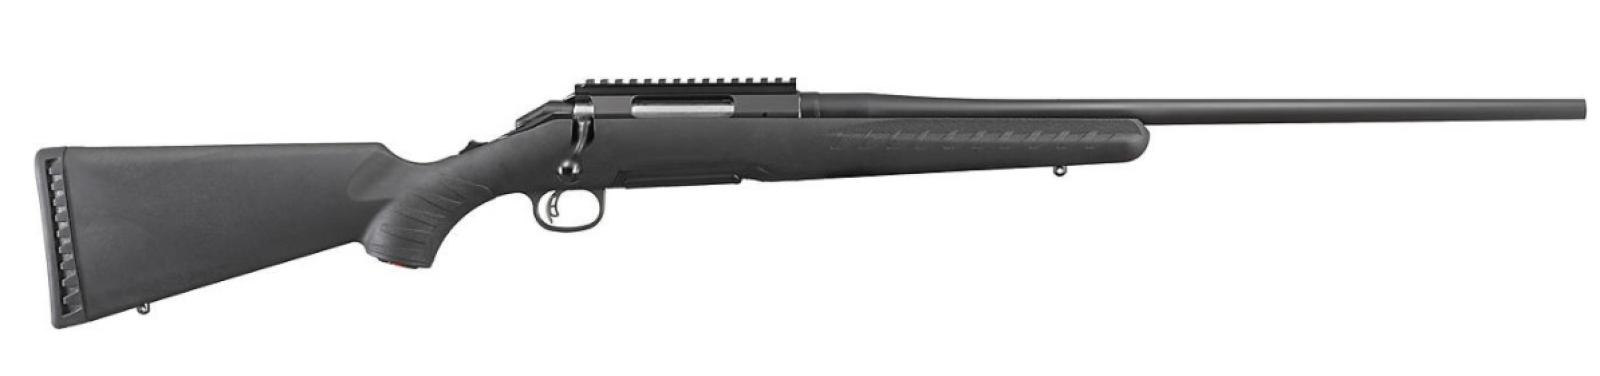 Ruger American Rifle Standard 7mm-08 Remington Bolt-Action Rifle